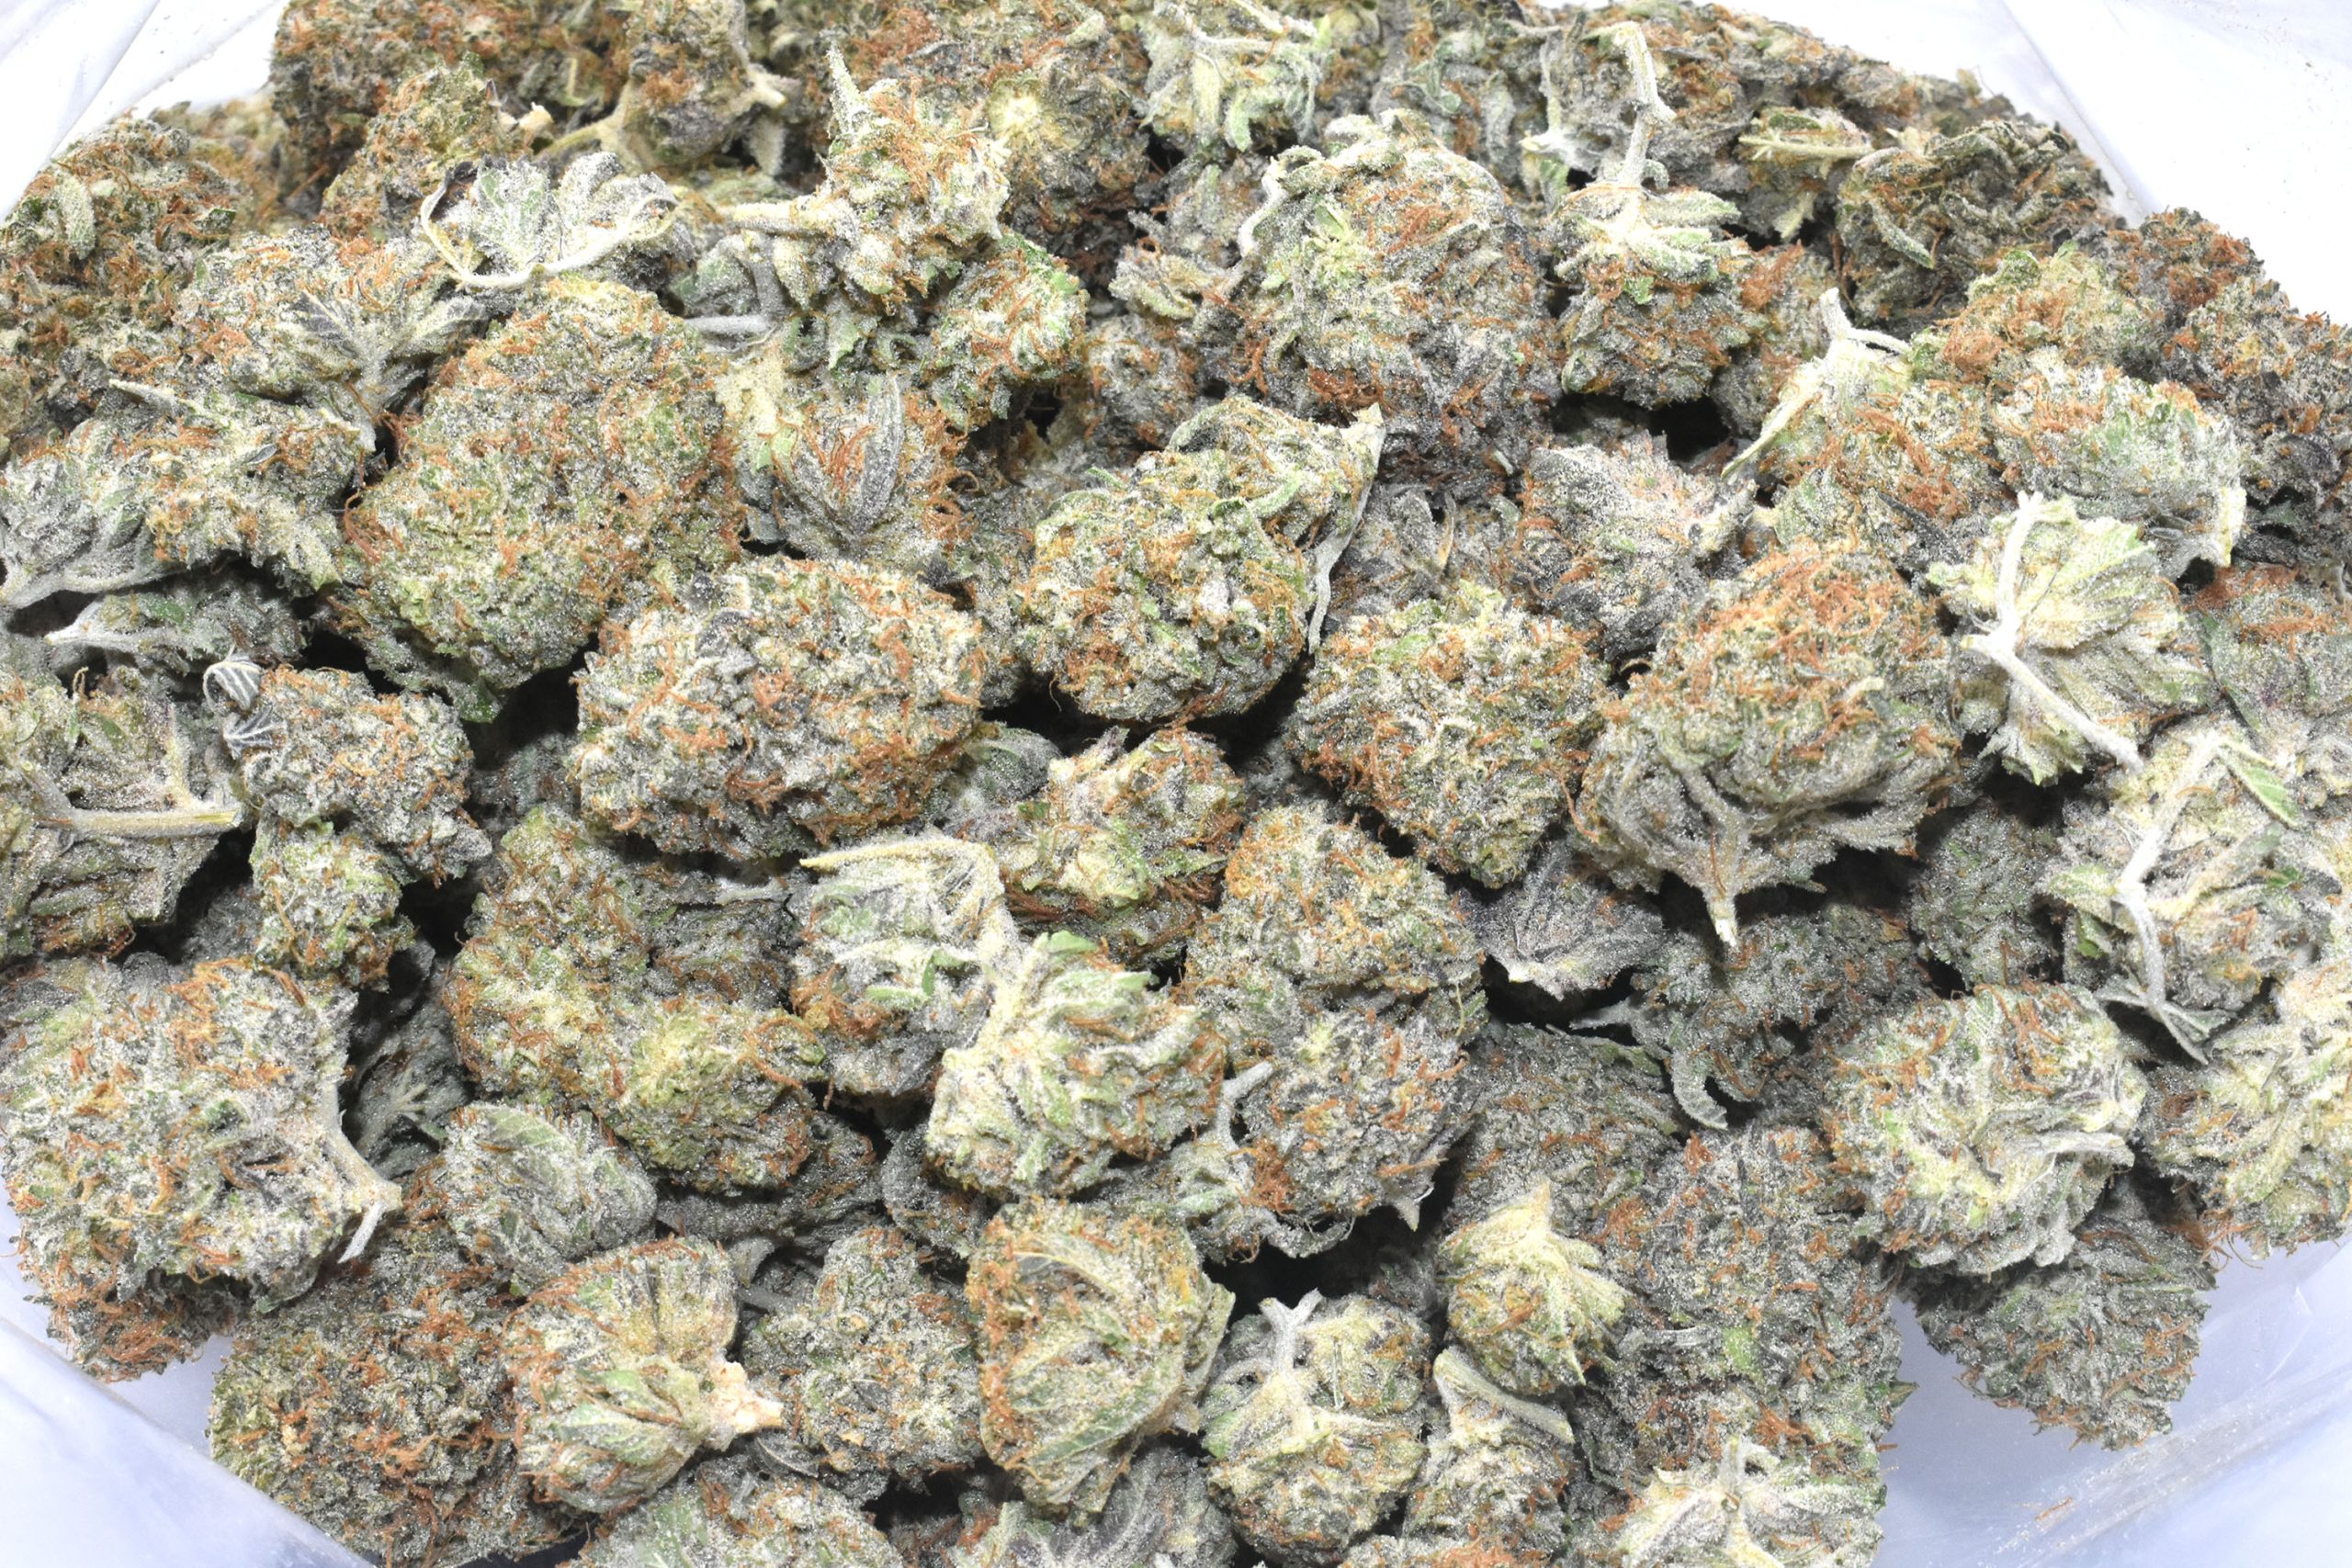 buy-pineapple-express-at-www.chronicfarms.cc-online-weed-dispensary